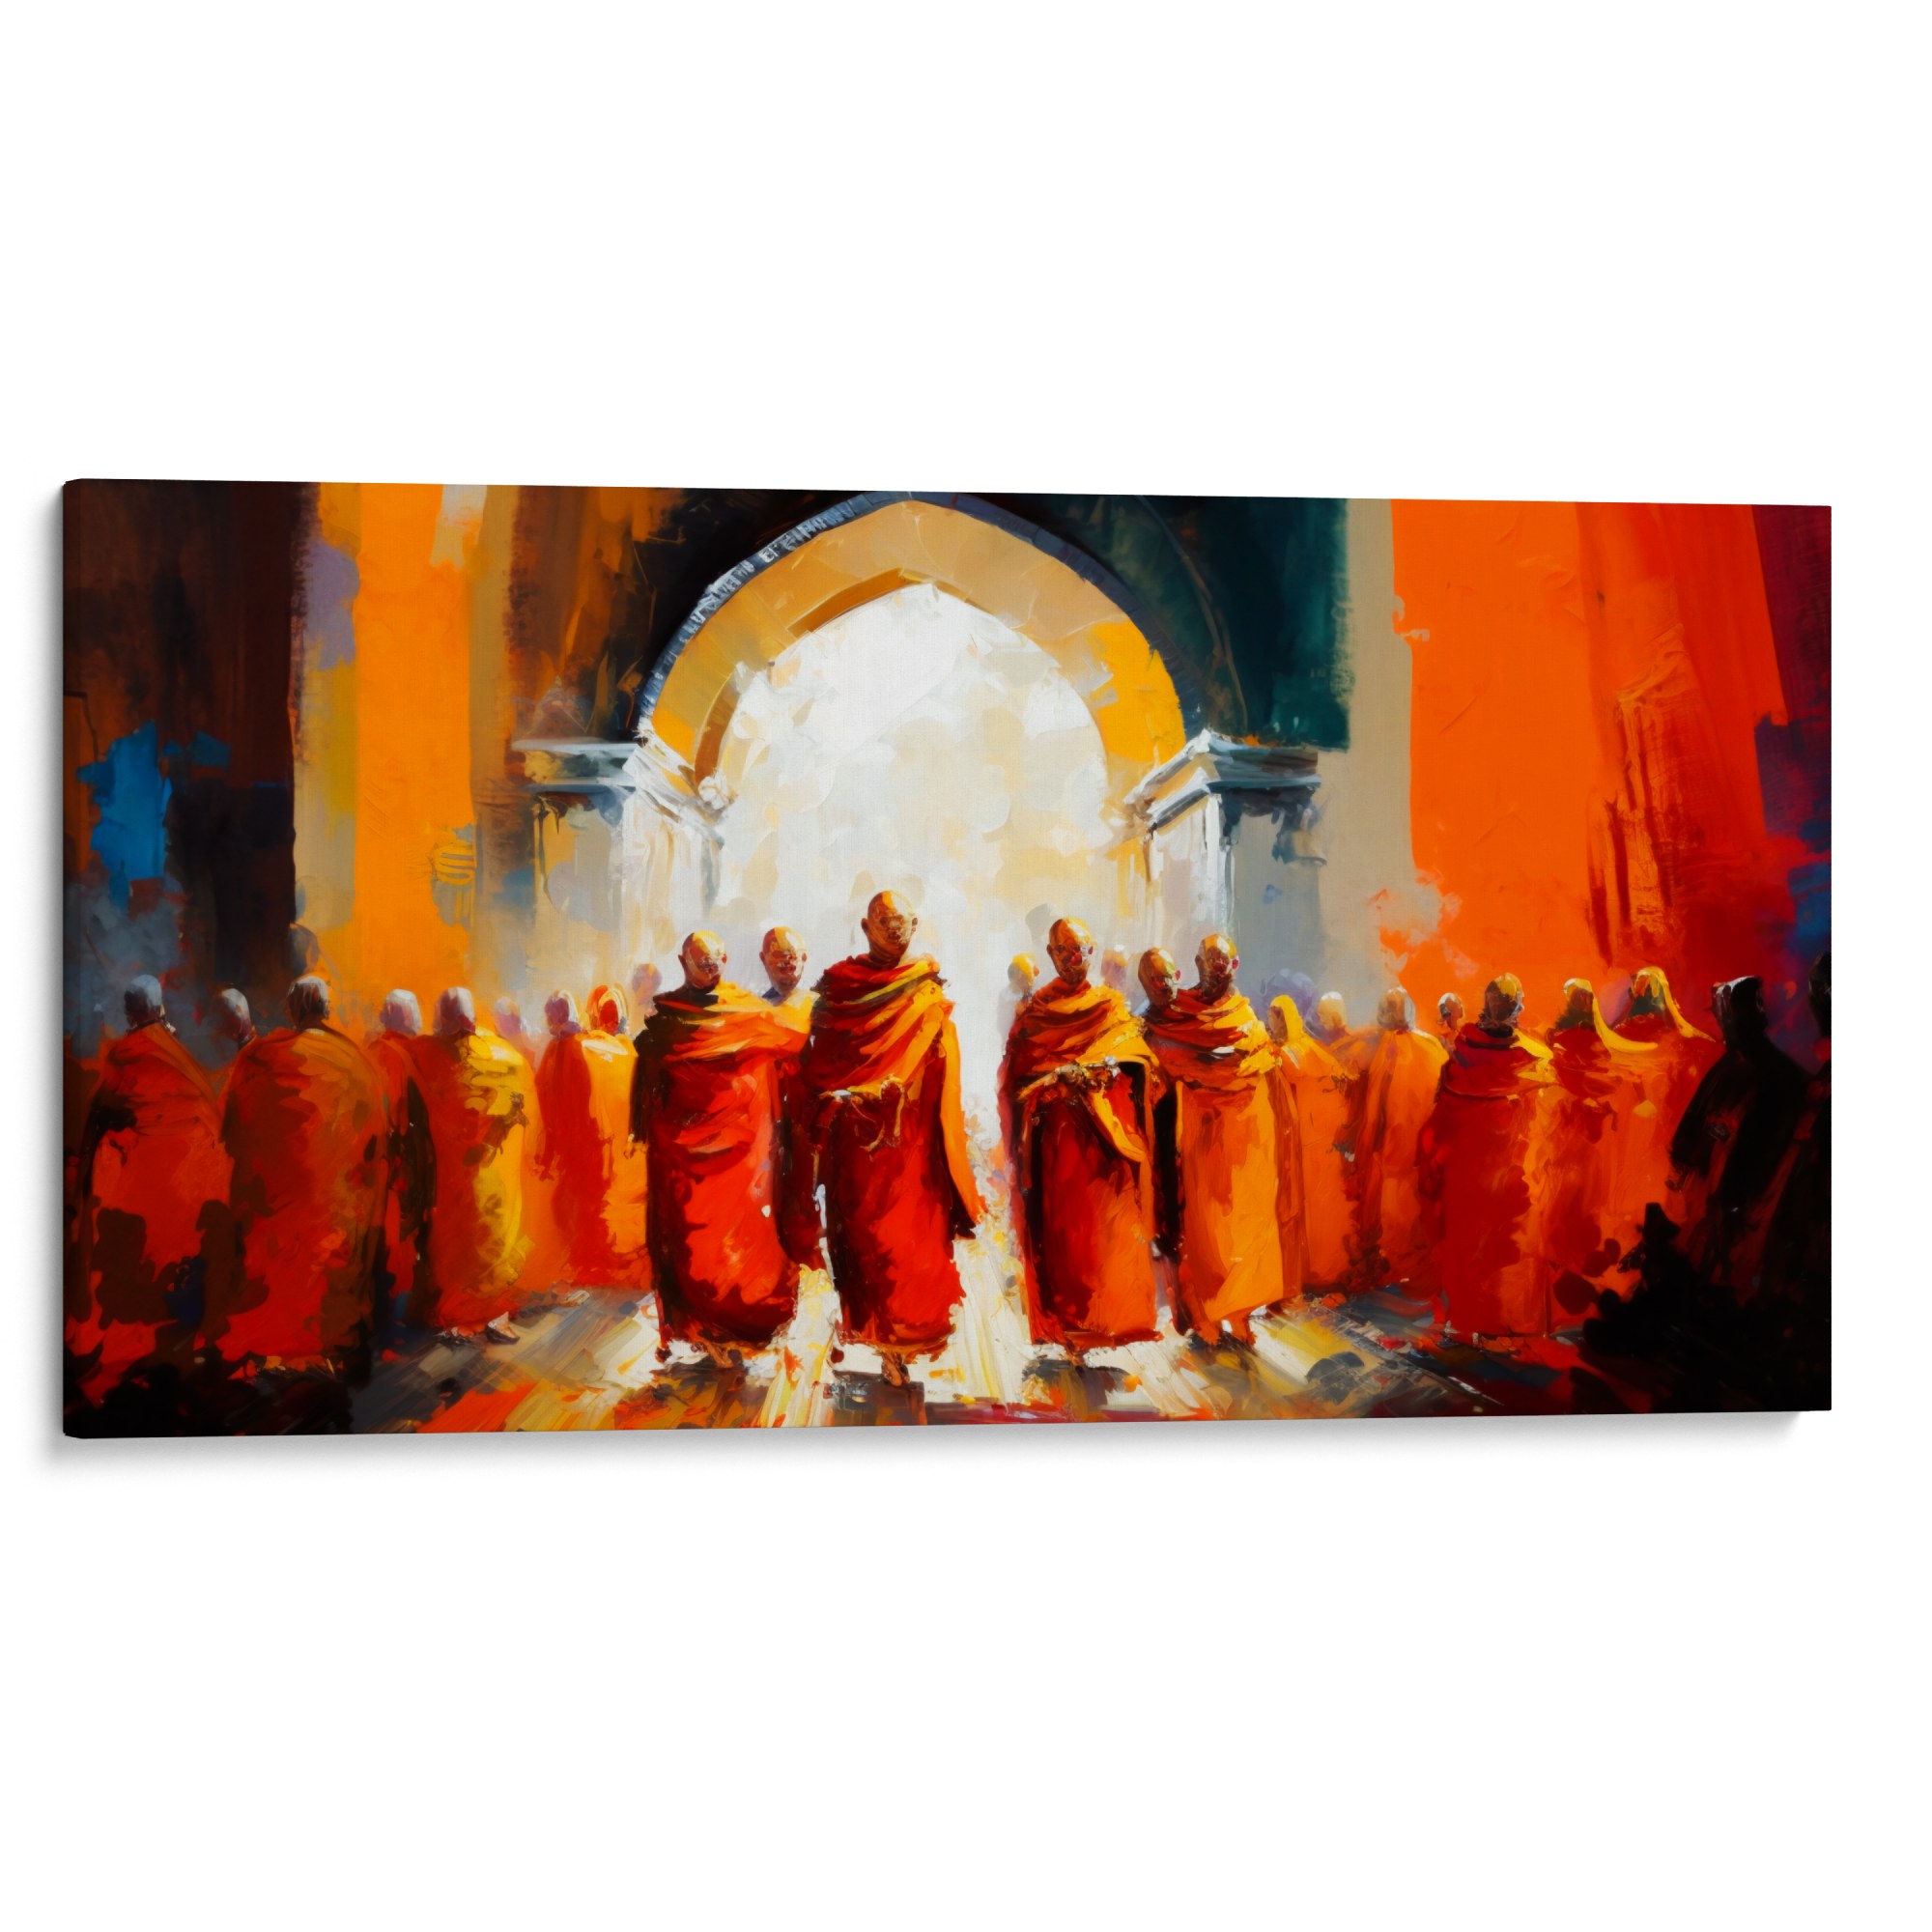 KARMA CROSSING Art Canvas - Group of monks approaching, a symbol of inner exploration and deep respect.